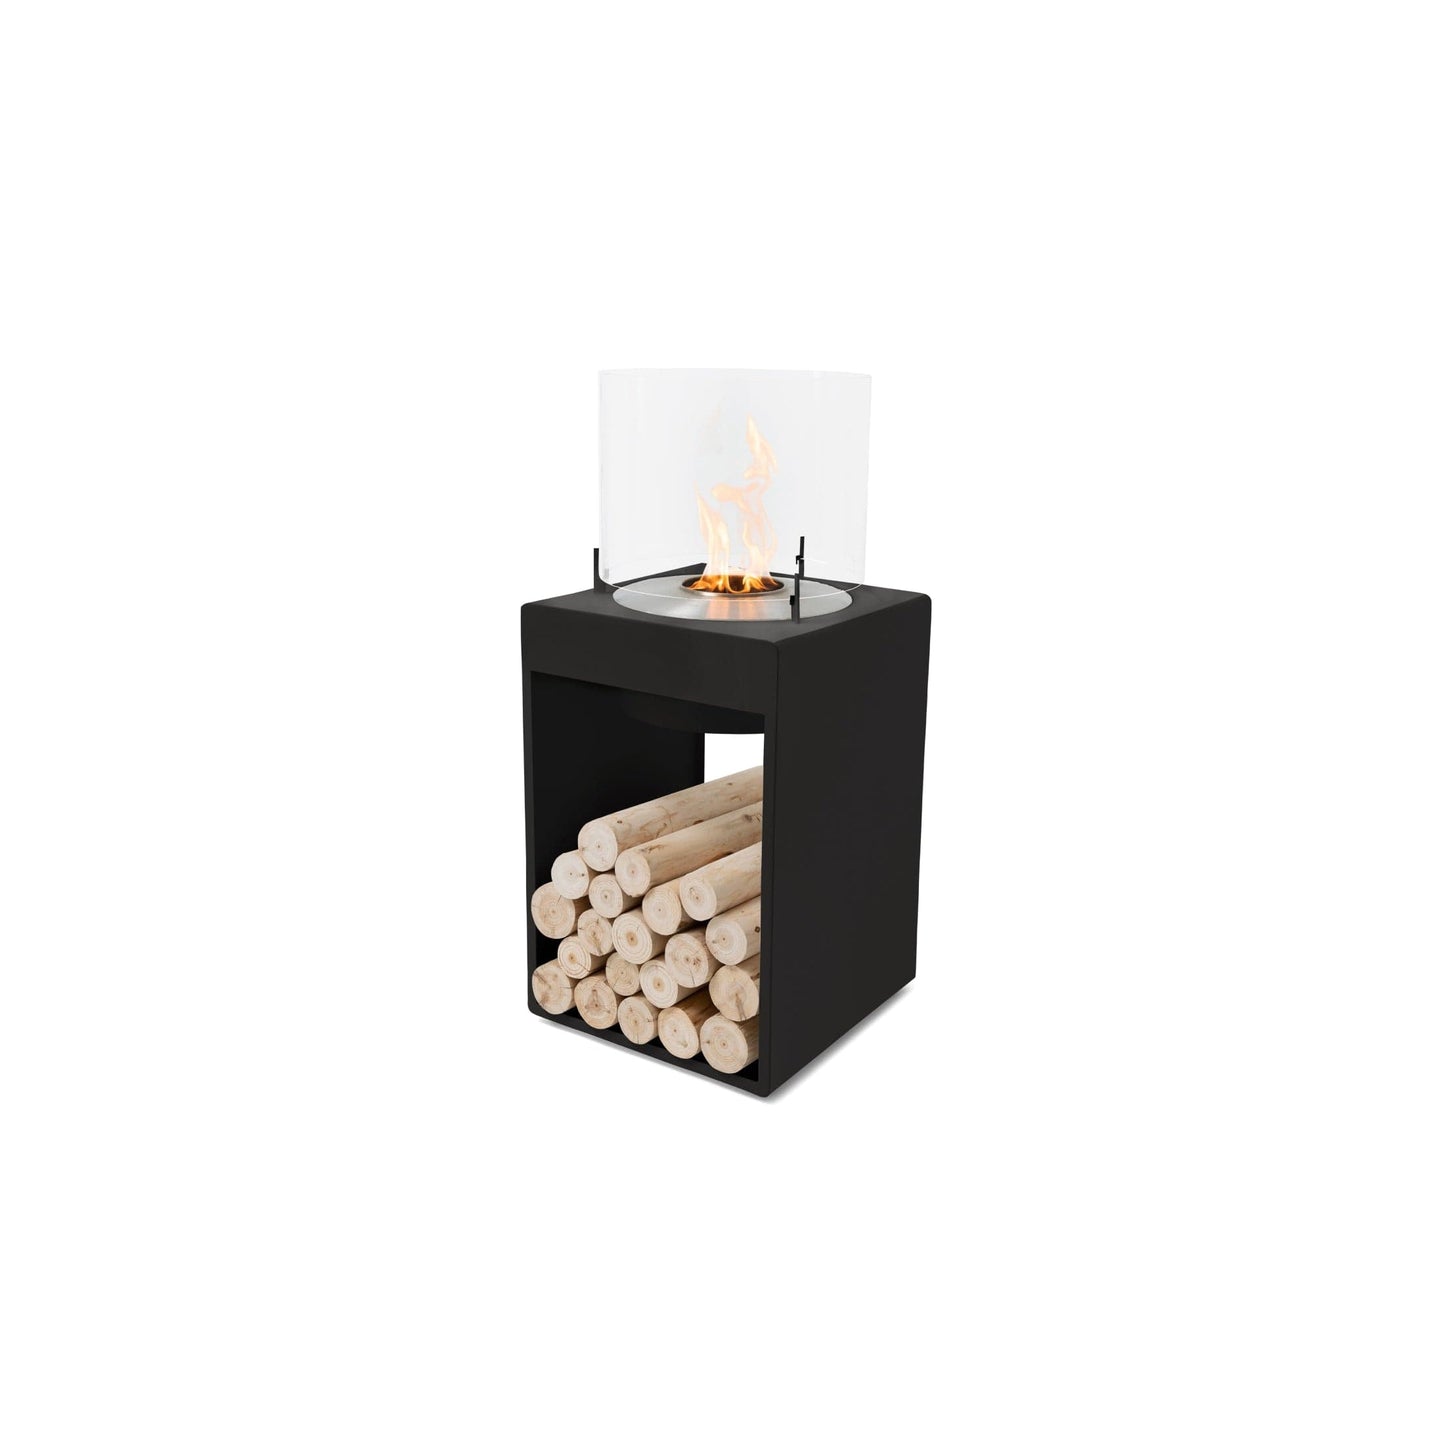 EcoSmart Fire POP 8T 39" Black Freestanding Designer Fireplace with Stainless Steel Burner by MAD Design Group